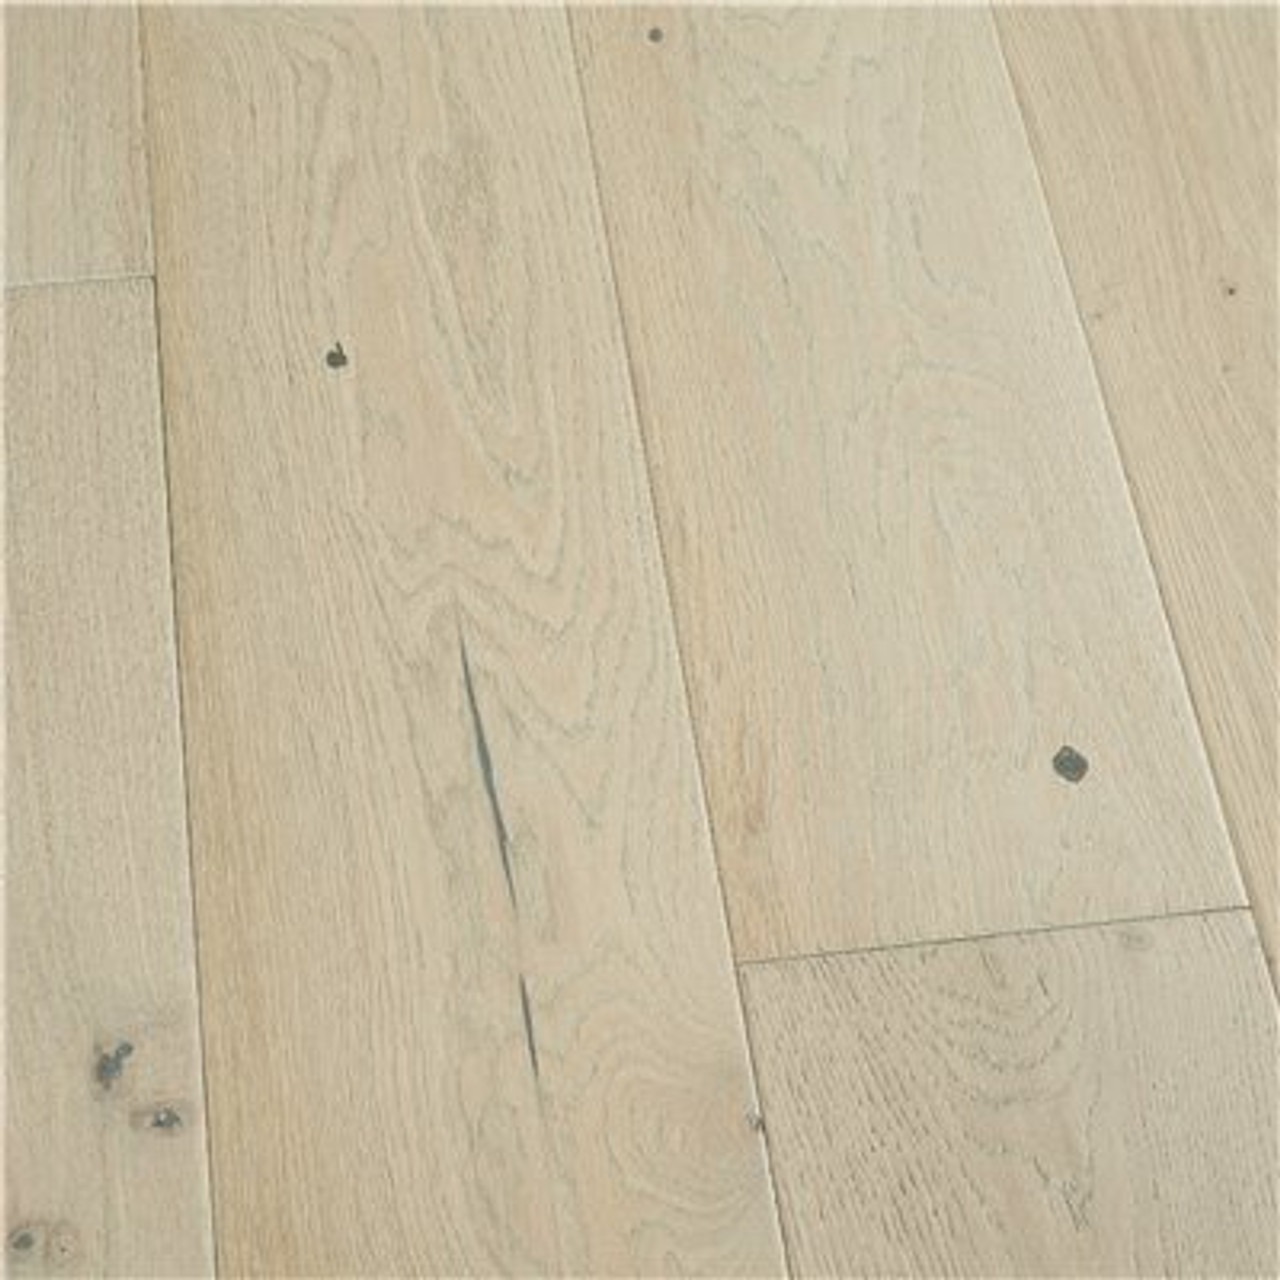 French Oak Salt Creek 1/2 In. Thick X 7-1/2 In. Wide X Varying Length Engineered Hardwood Flooring (23.31 Sq. Ft./Case)